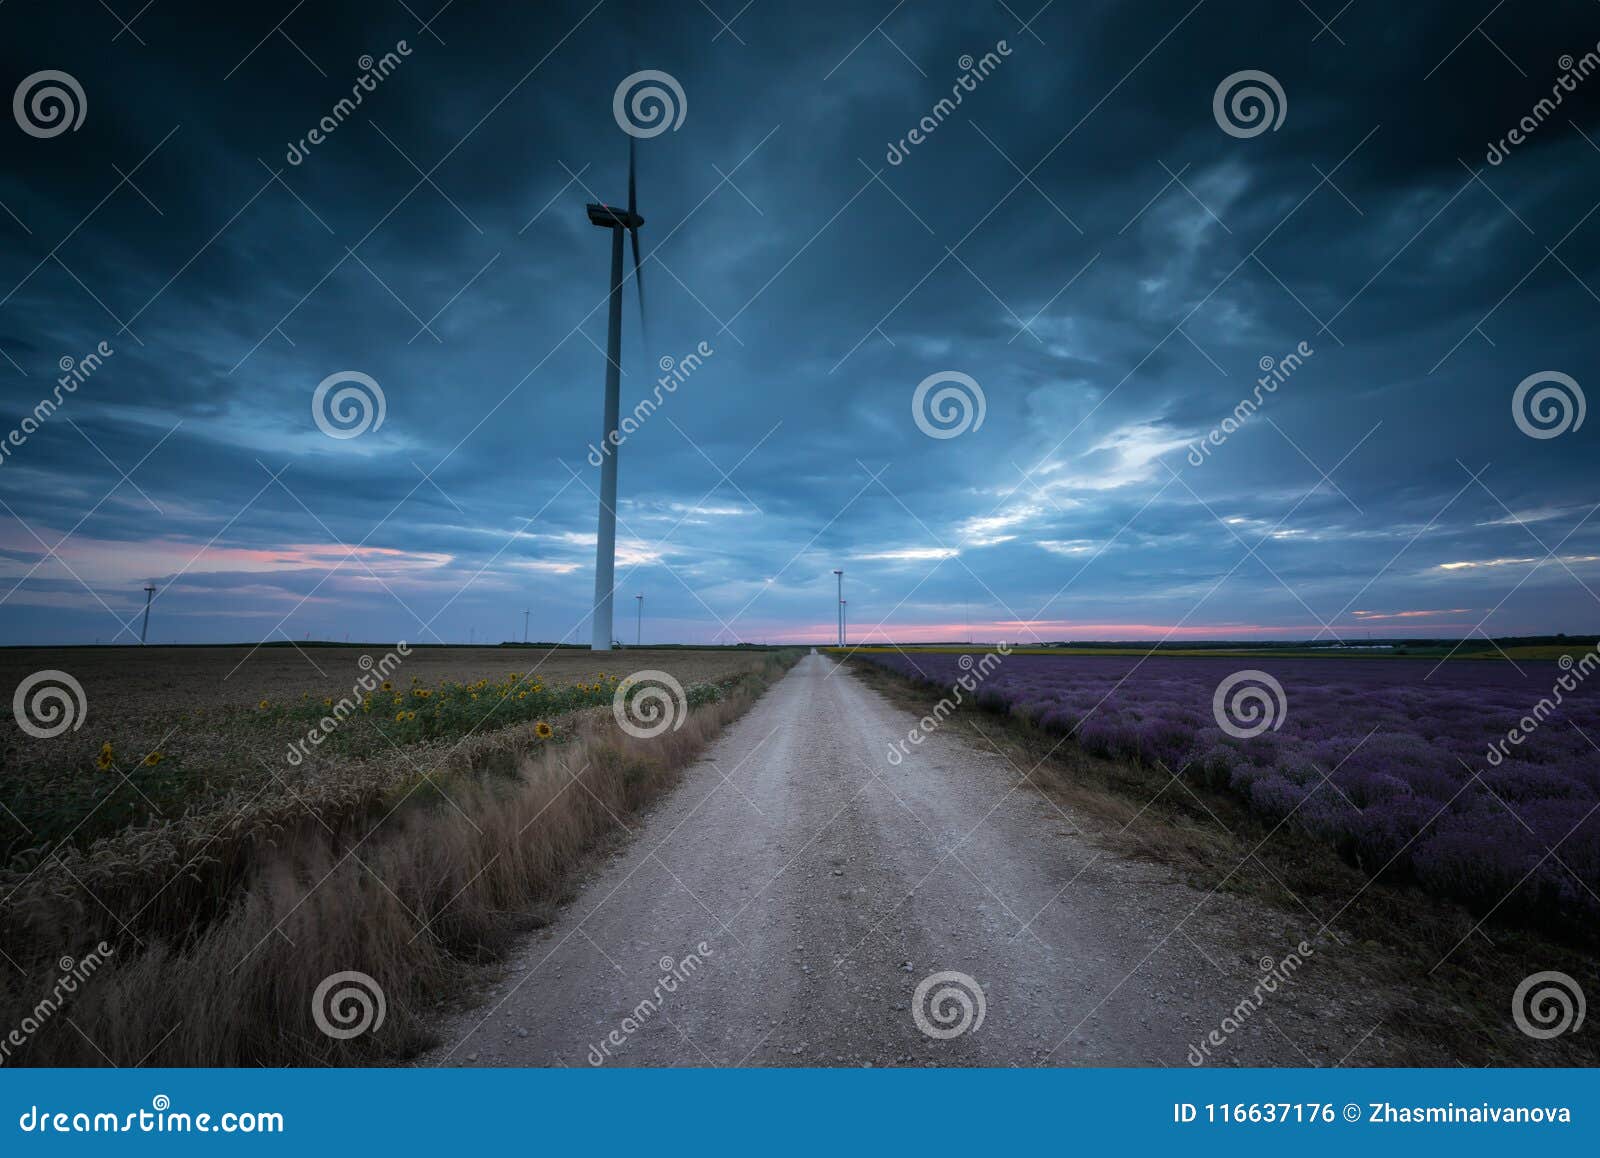 Country Road In Summer Evening Stock Photo Image Of Blue Beauty